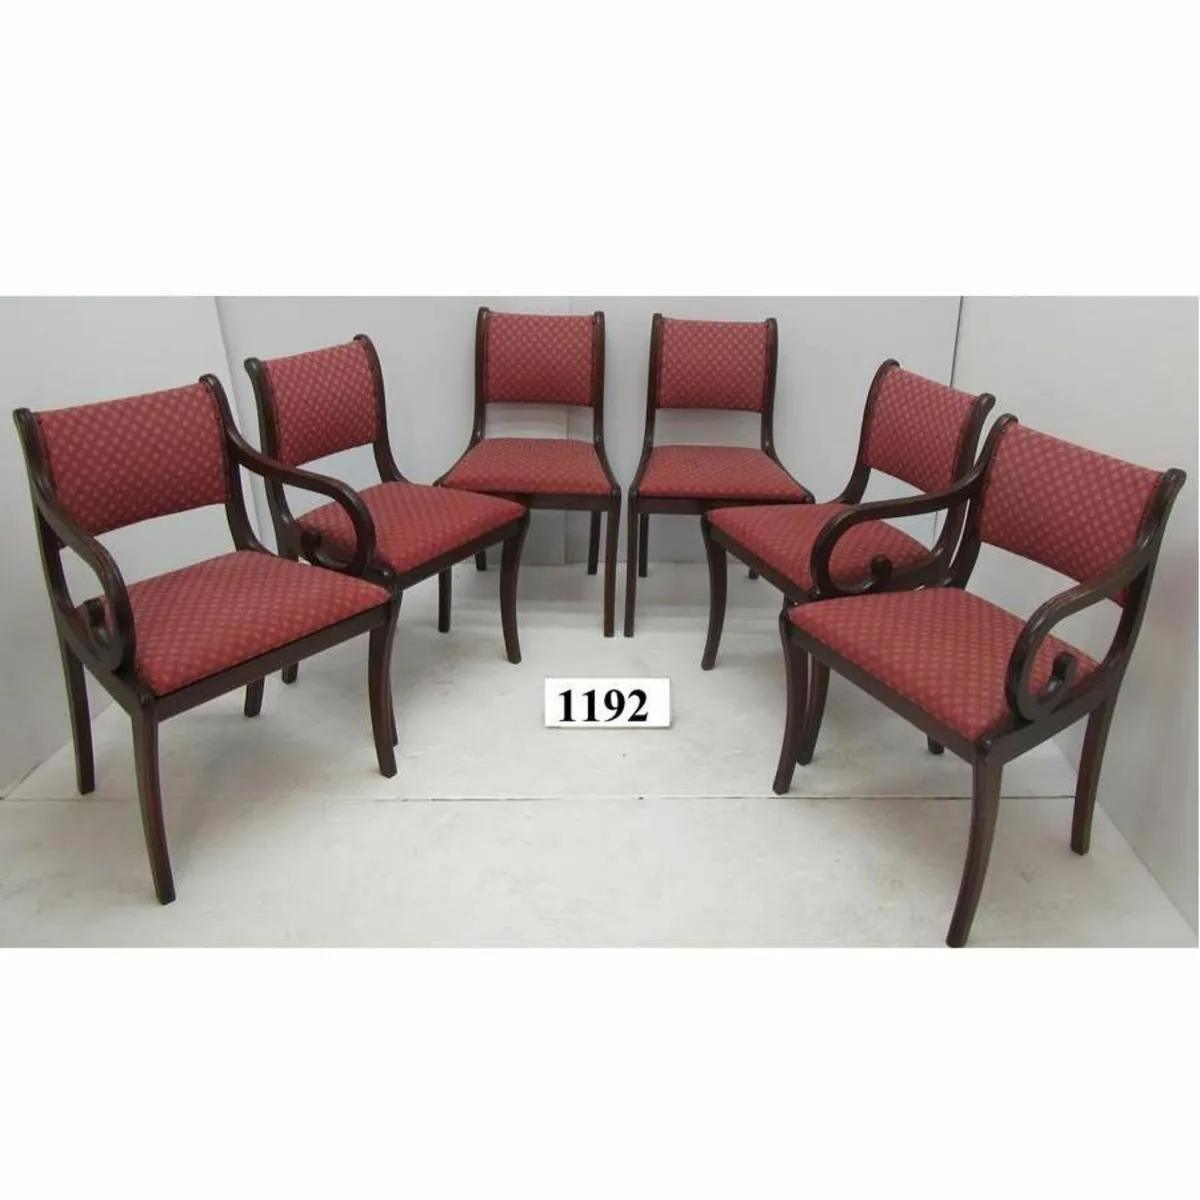 Set of 6 chairs.   #1192